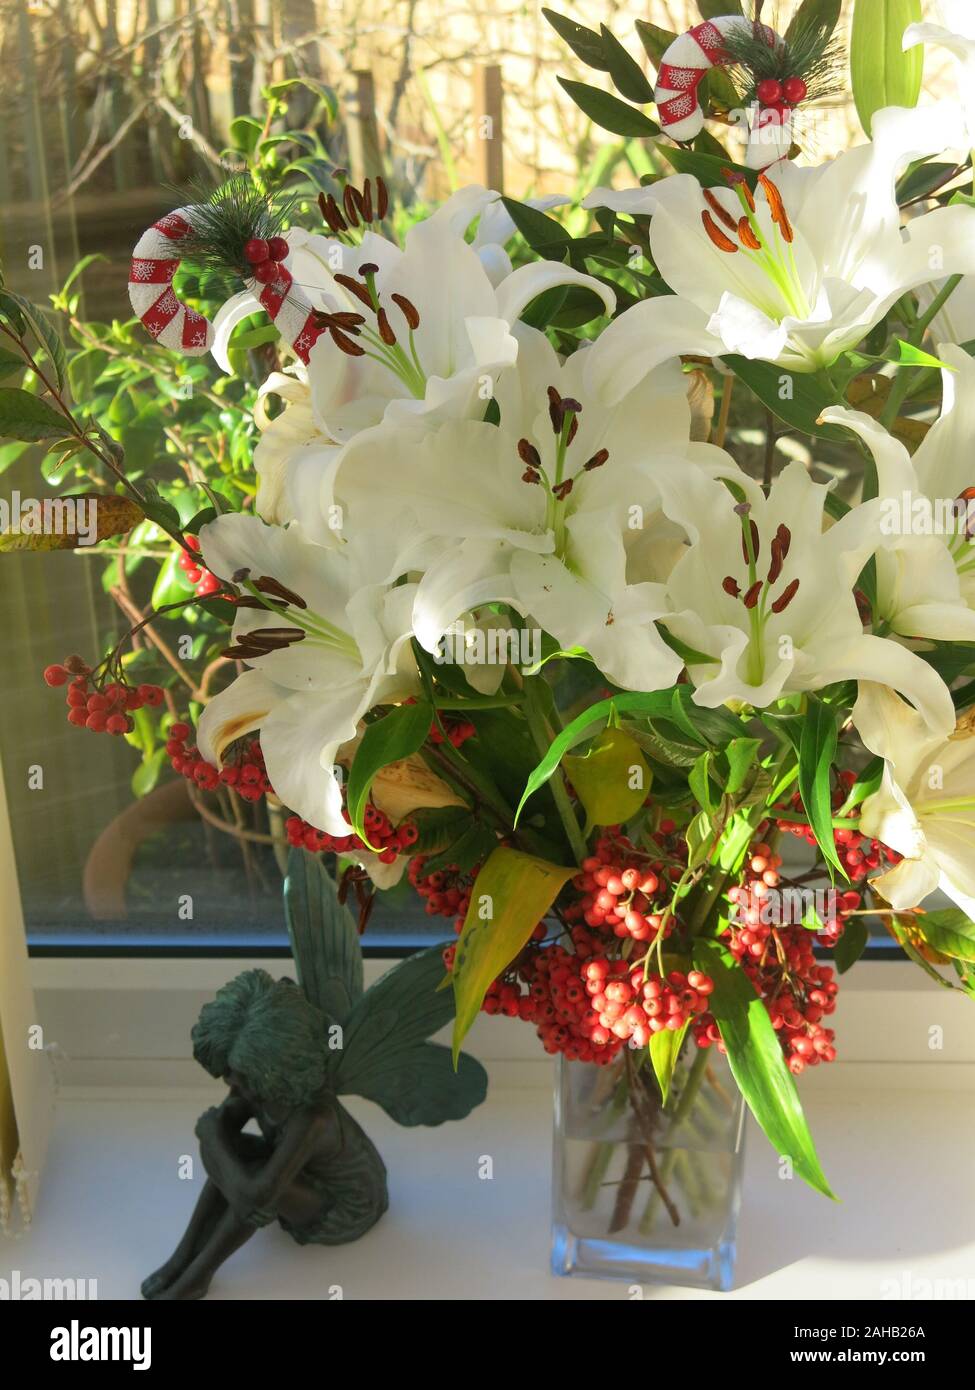 A Festive Floral Arrangement For A Windowsill At Christmas White Lilies Red Berries And Decorated Candy Canes Stock Photo Alamy